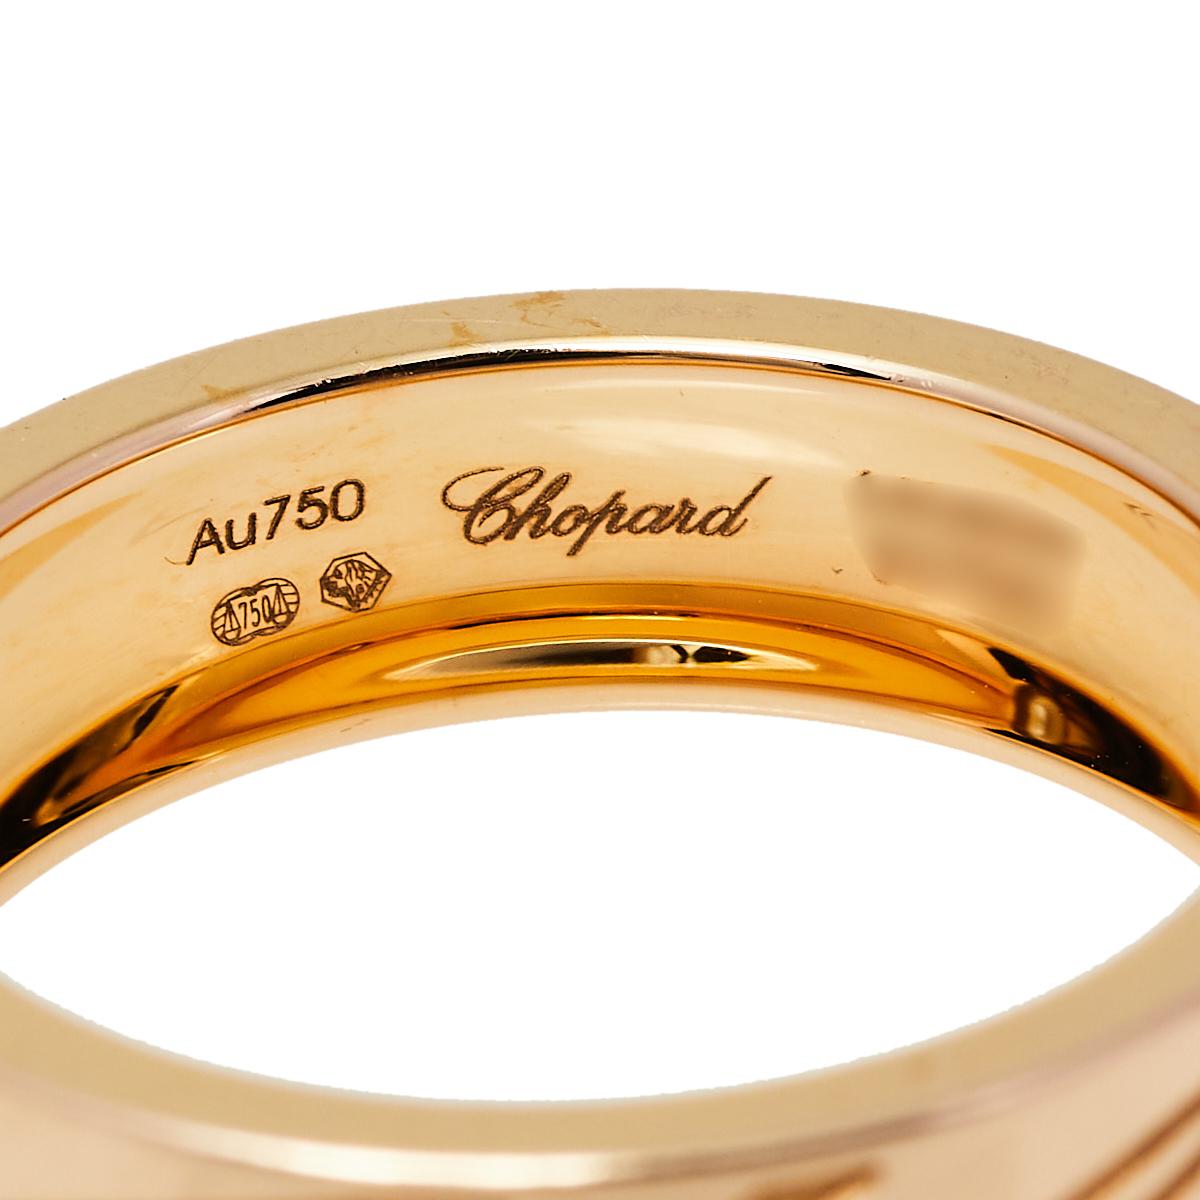 This creation from Chopard speaks luxury in a way that is minimal and elegant. The ring has been excellently crafted from 18k rose gold. Set beautifully on the ring are a single diamond and cursive engravings of the brand's name—a detail that makes